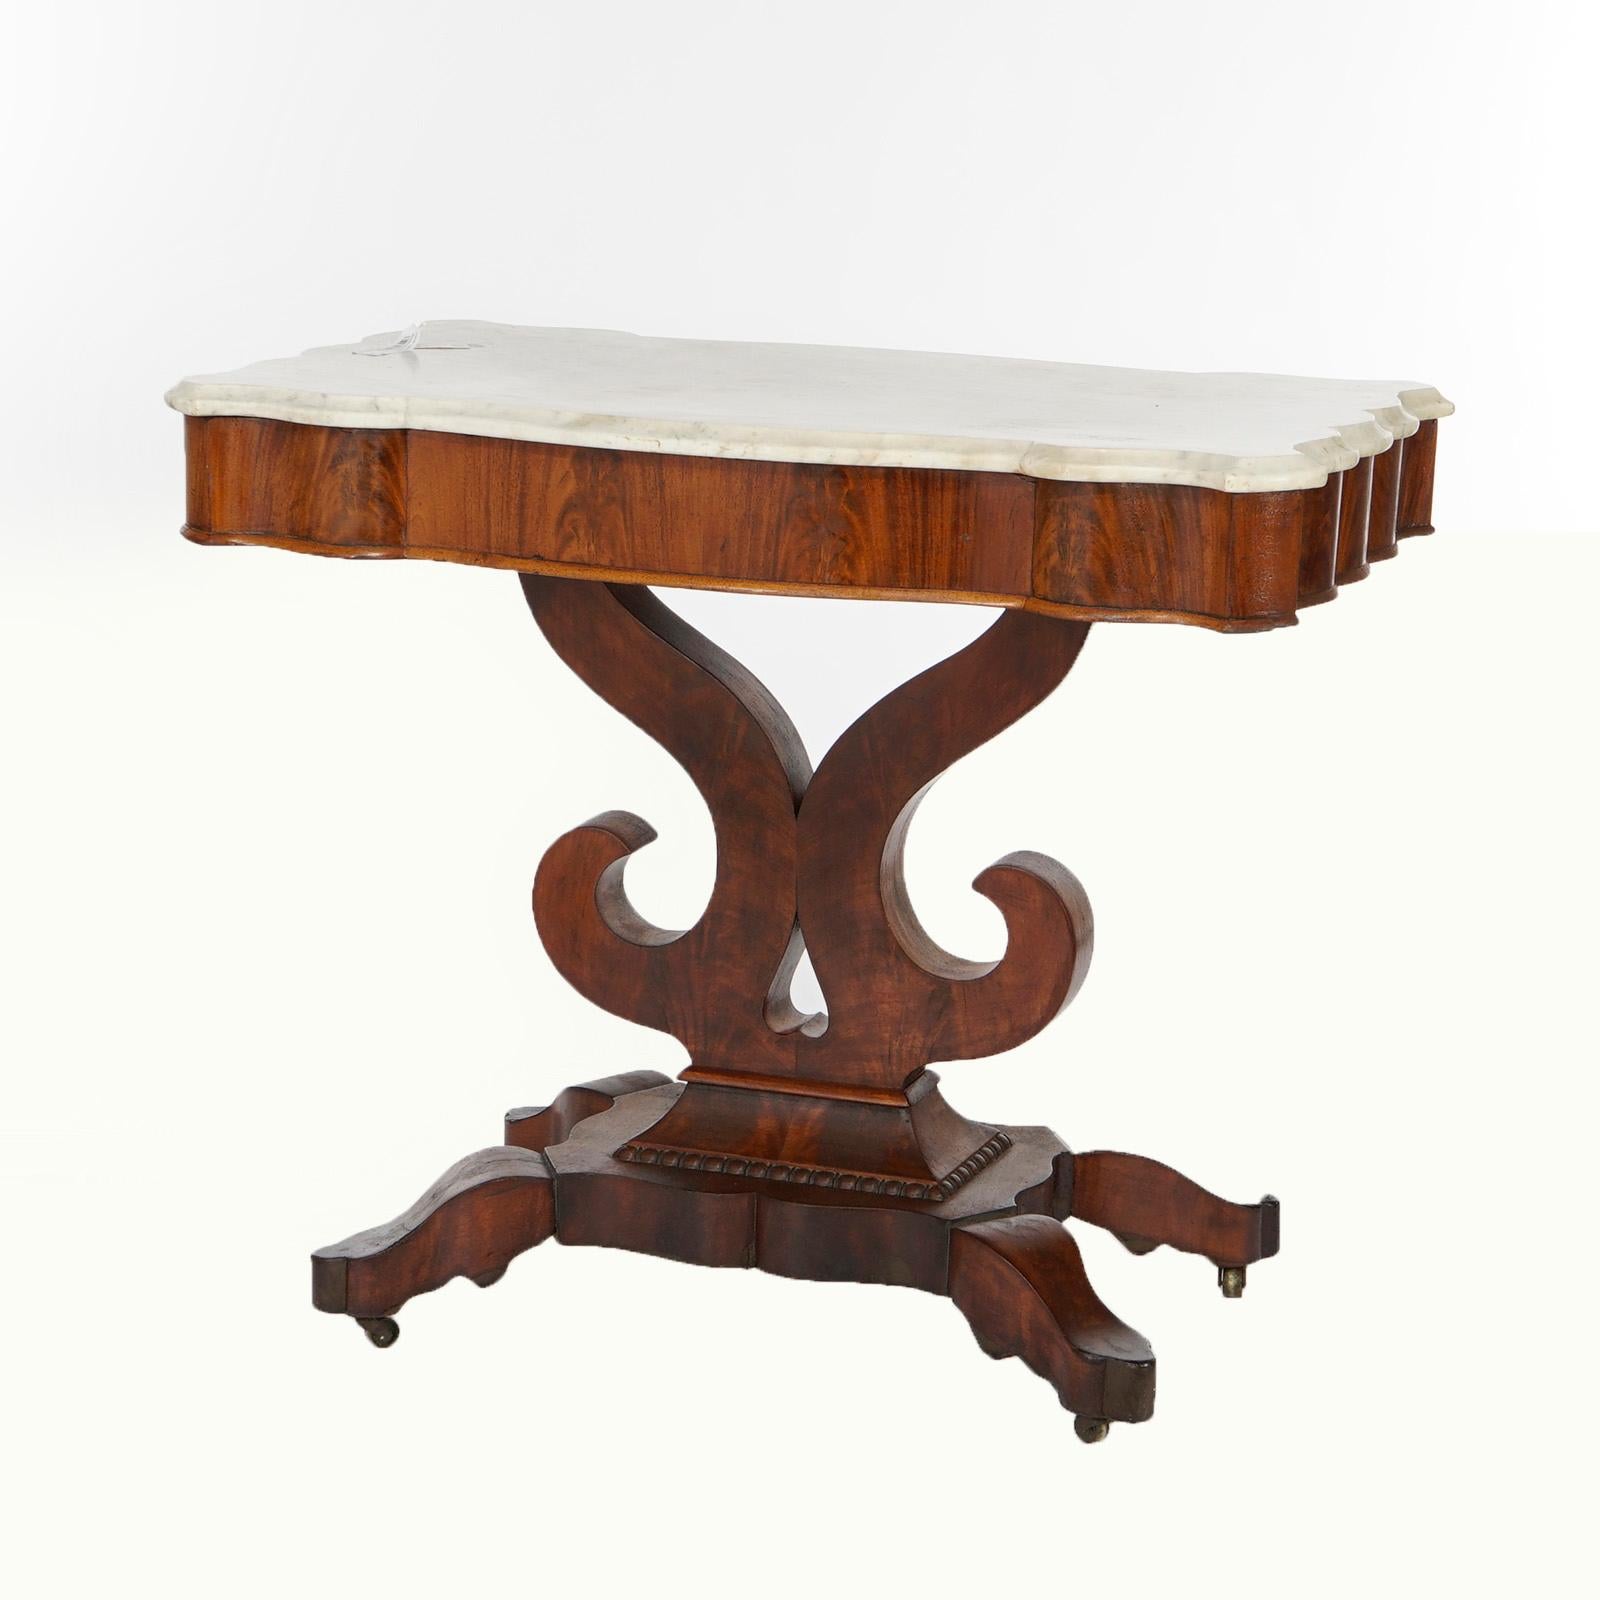 An antique American Empire Classical Greco center table offers beveled and shaped marble top over double scroll base raised on stylized cabriole legs, c1840

Measures- 29.75''H x 35.5''W x 20.25''D.